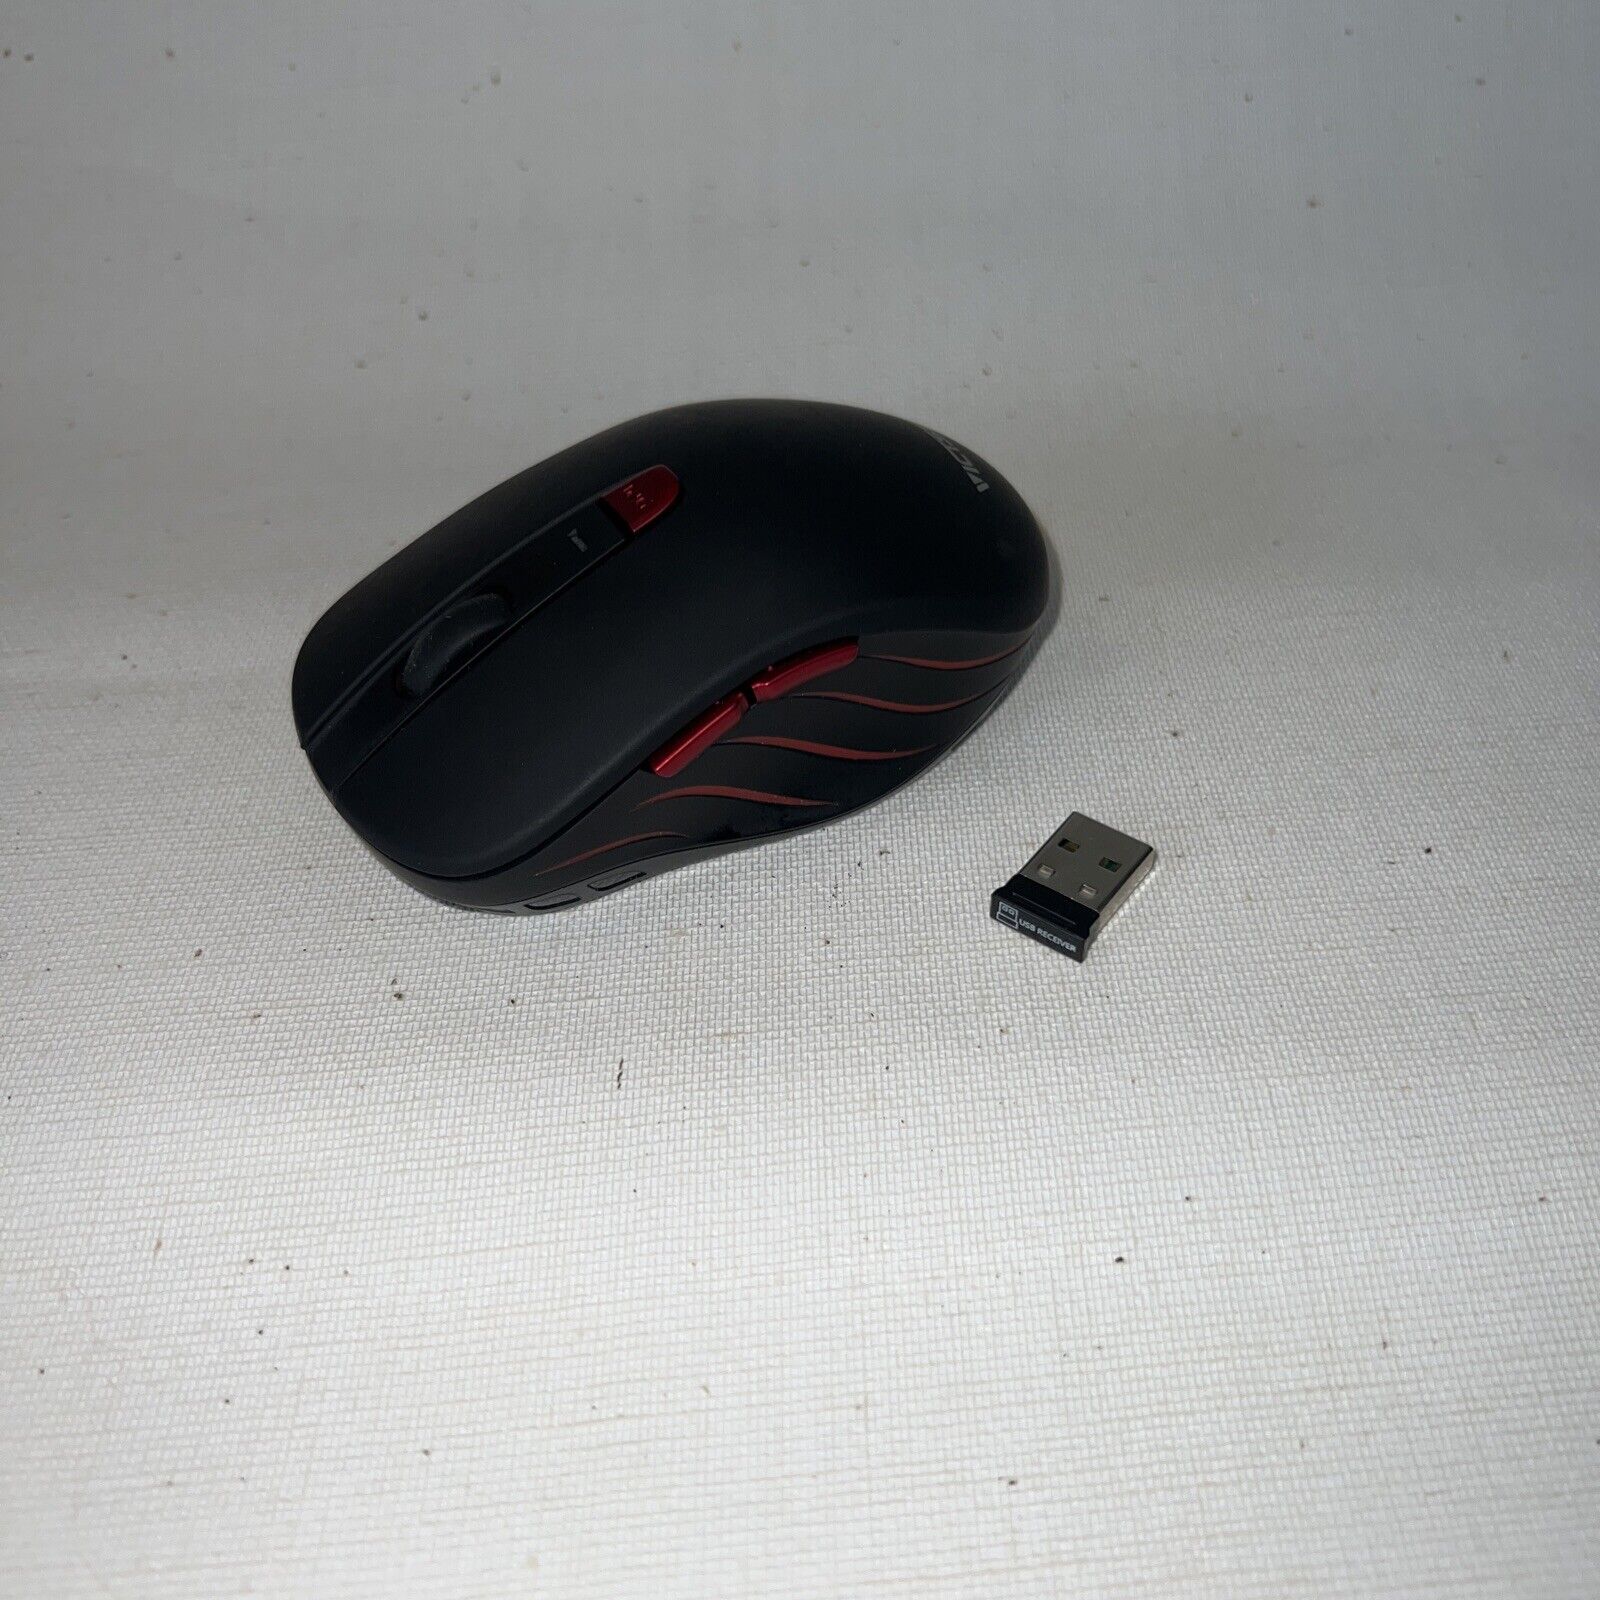 Victsing pc106a 5 Button Bluetooth Mouse 2.4g Adjustable DPI Near Mint LOOK NICE